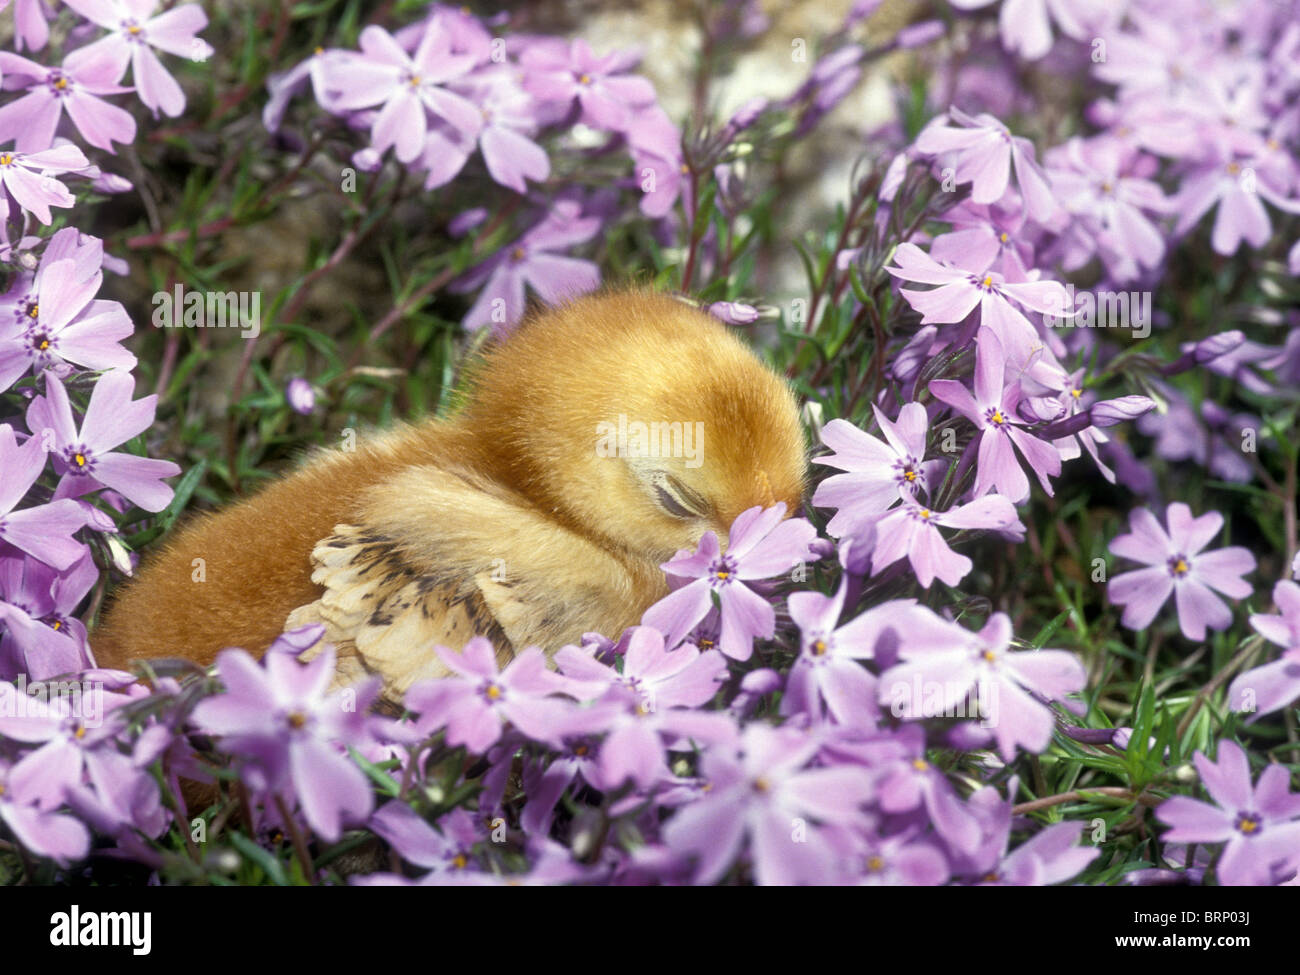 Cute Rhode Island Red baby chick asleep in garden among a profusion of lavender creeping phlox, USA Stock Photo